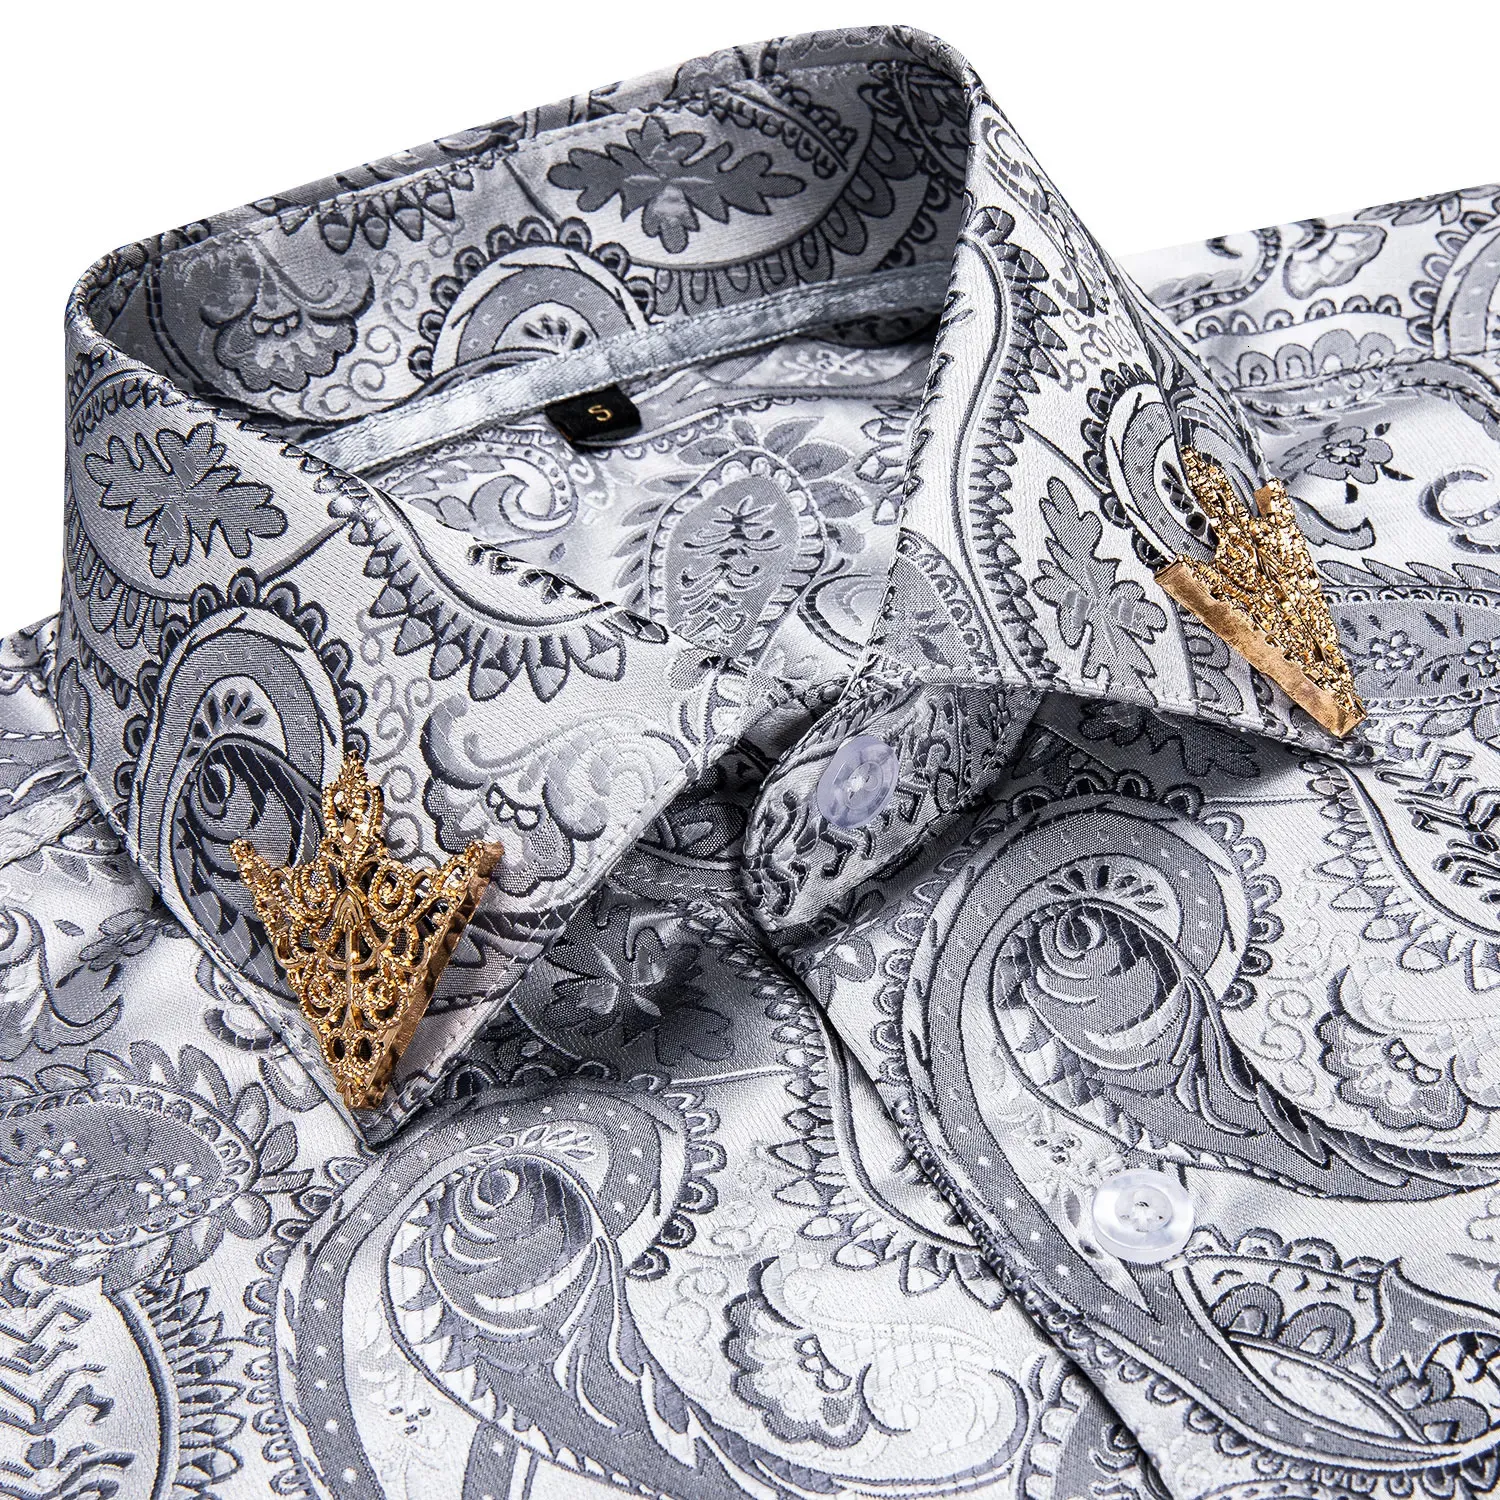 Fashion Paisley Floral Men Shirt Silver White Business Casual Long Sleeve Social Collar Shirts Brand Male Button Blouses 240125